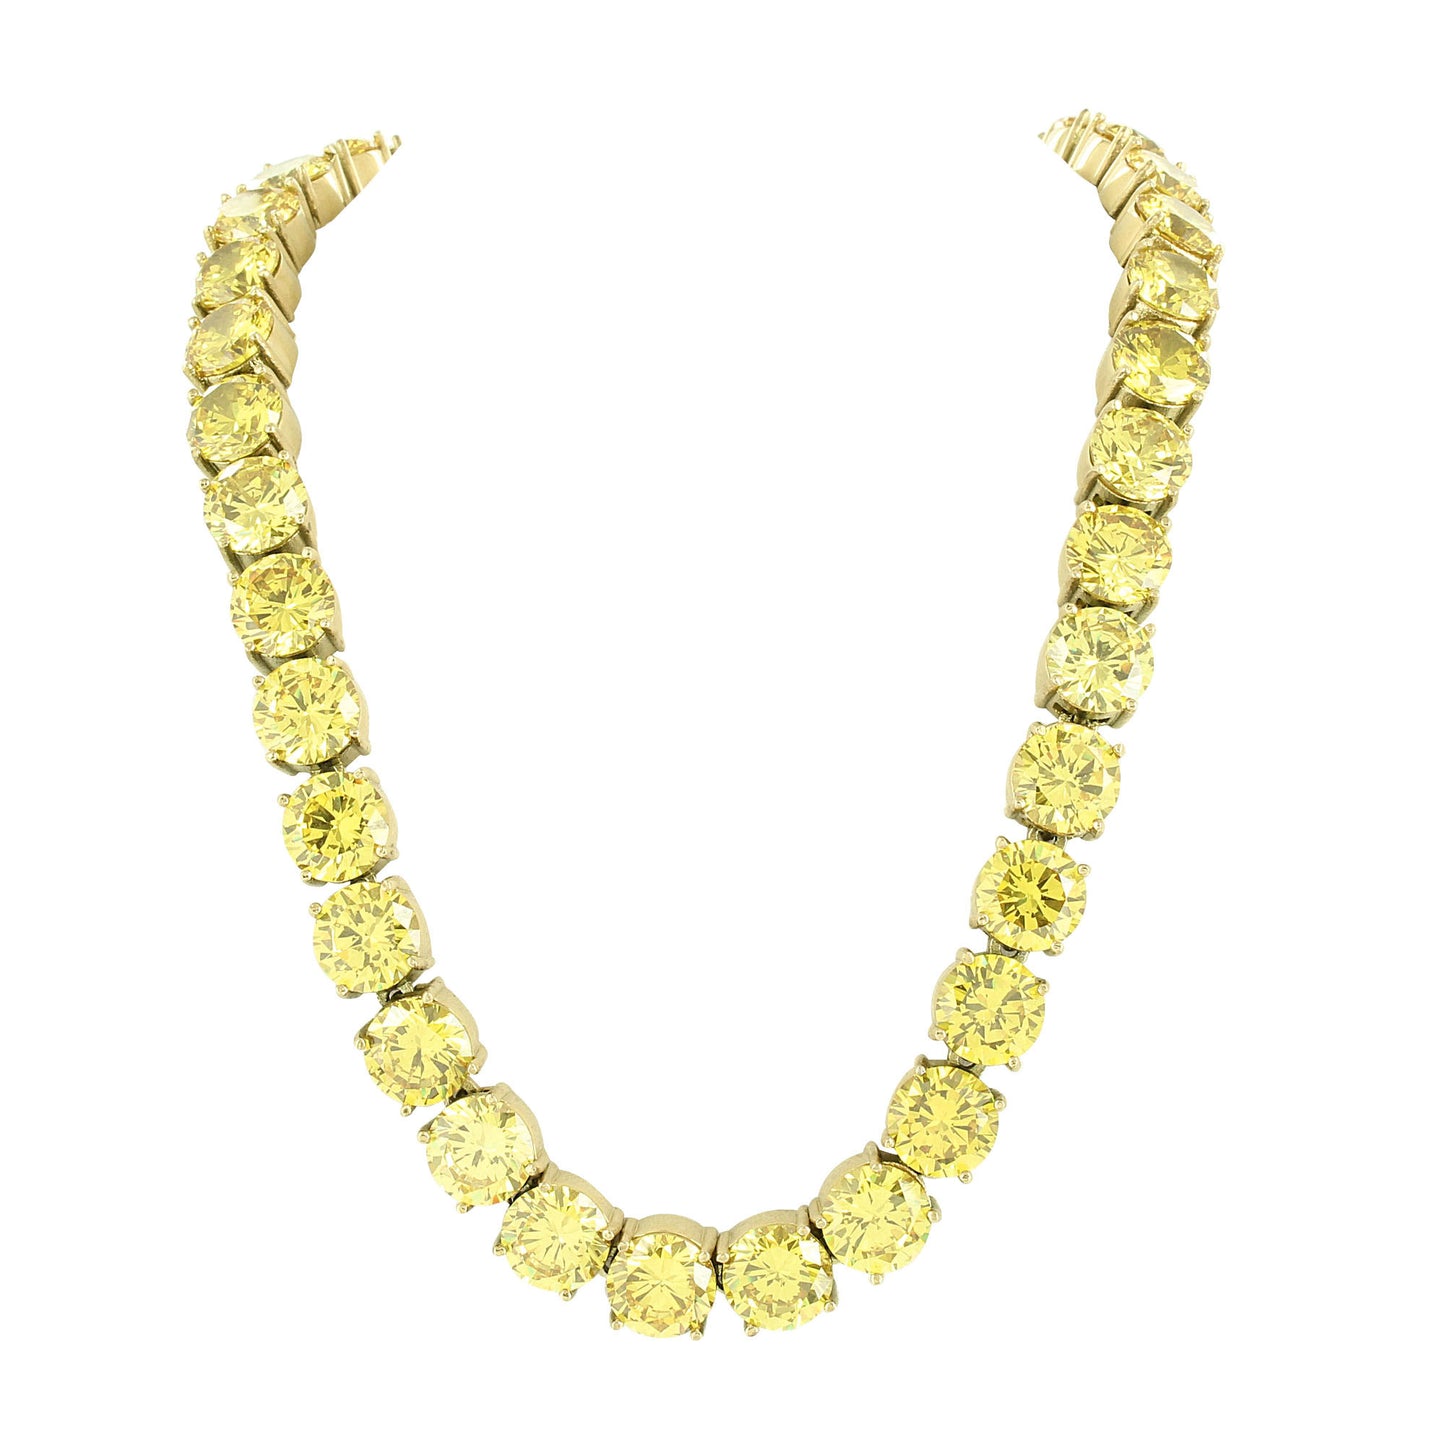 Solitaire Lab Diamond Necklace Canary Round Cut Stainless Steel Gold Tone 10 MM